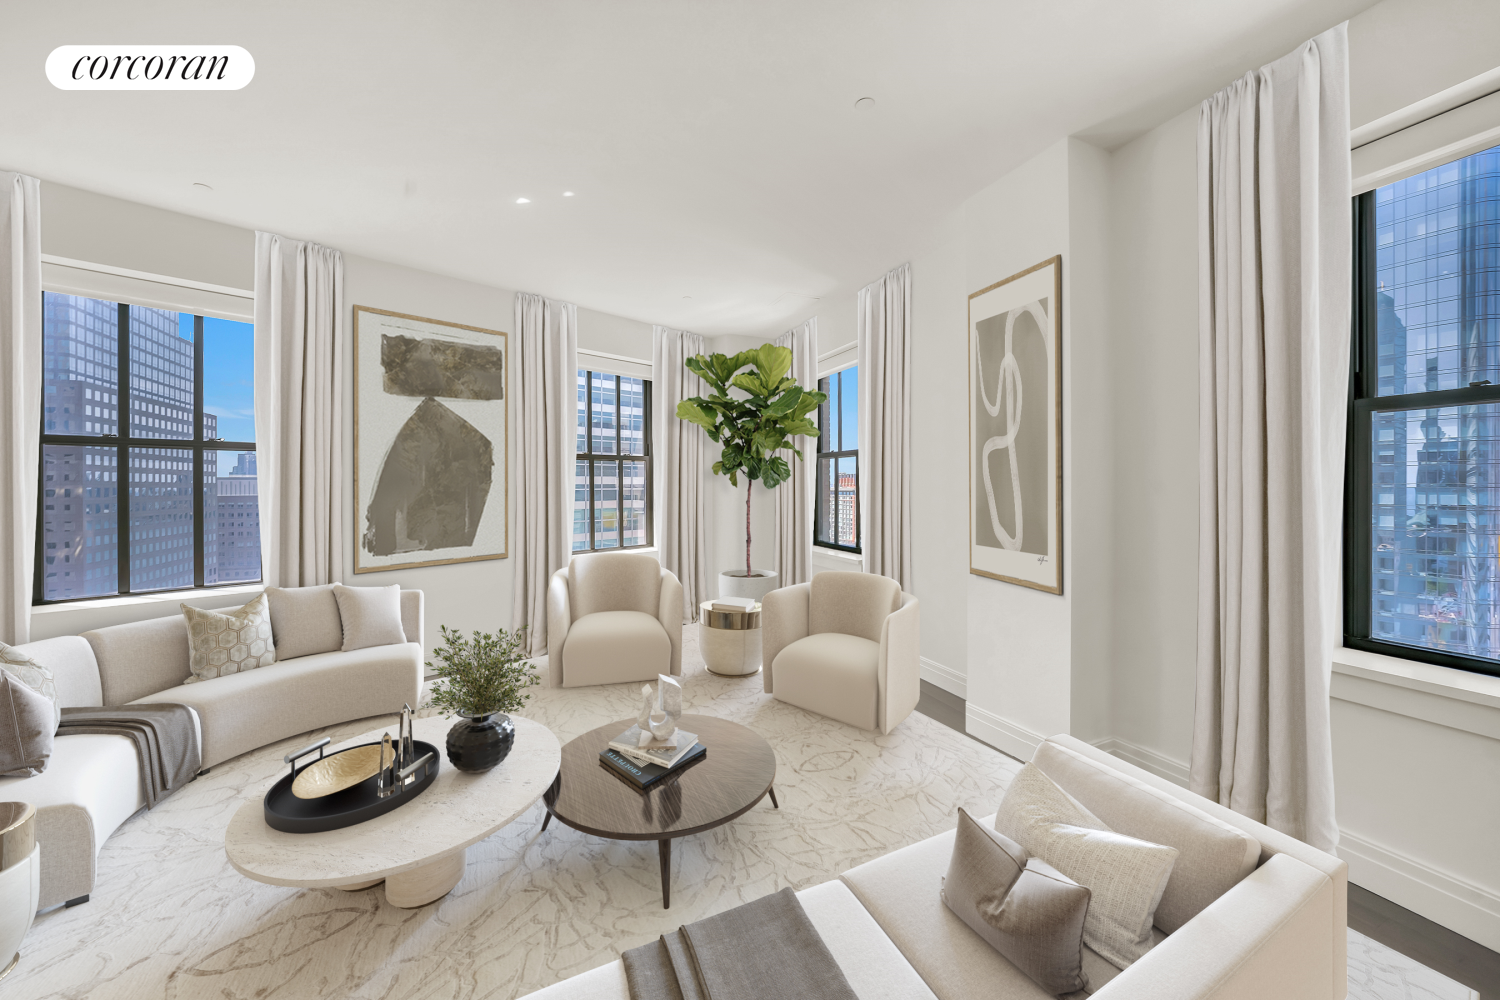 100 Barclay Street 17B, Tribeca, Downtown, NYC - 3 Bedrooms  
3.5 Bathrooms  
5 Rooms - 